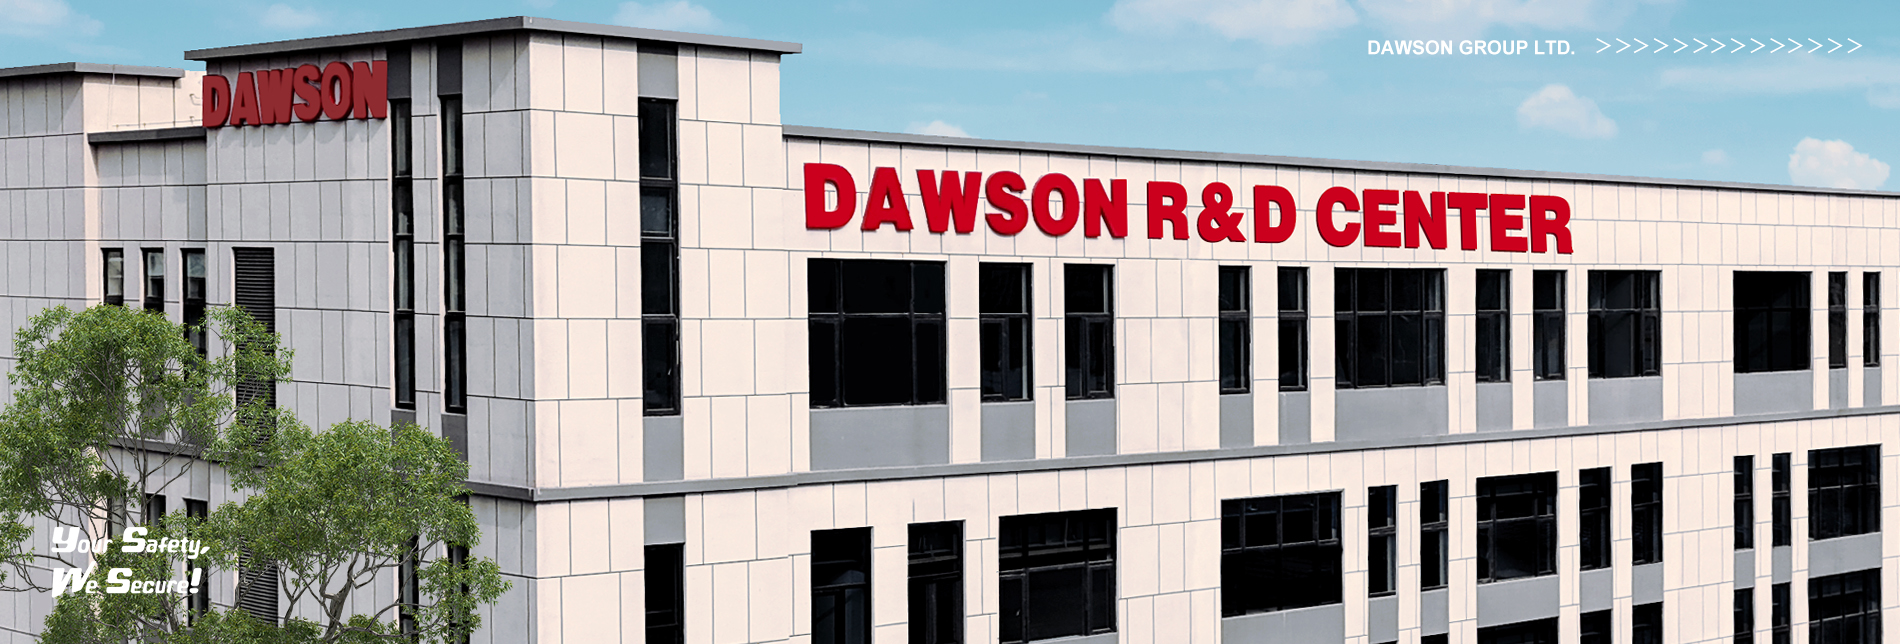 Partial display of 3D renderings - DAWSON Industrial Research Institute (IRI) - Dawson Group Ltd. - China Manufacturer, Supplier, Factory